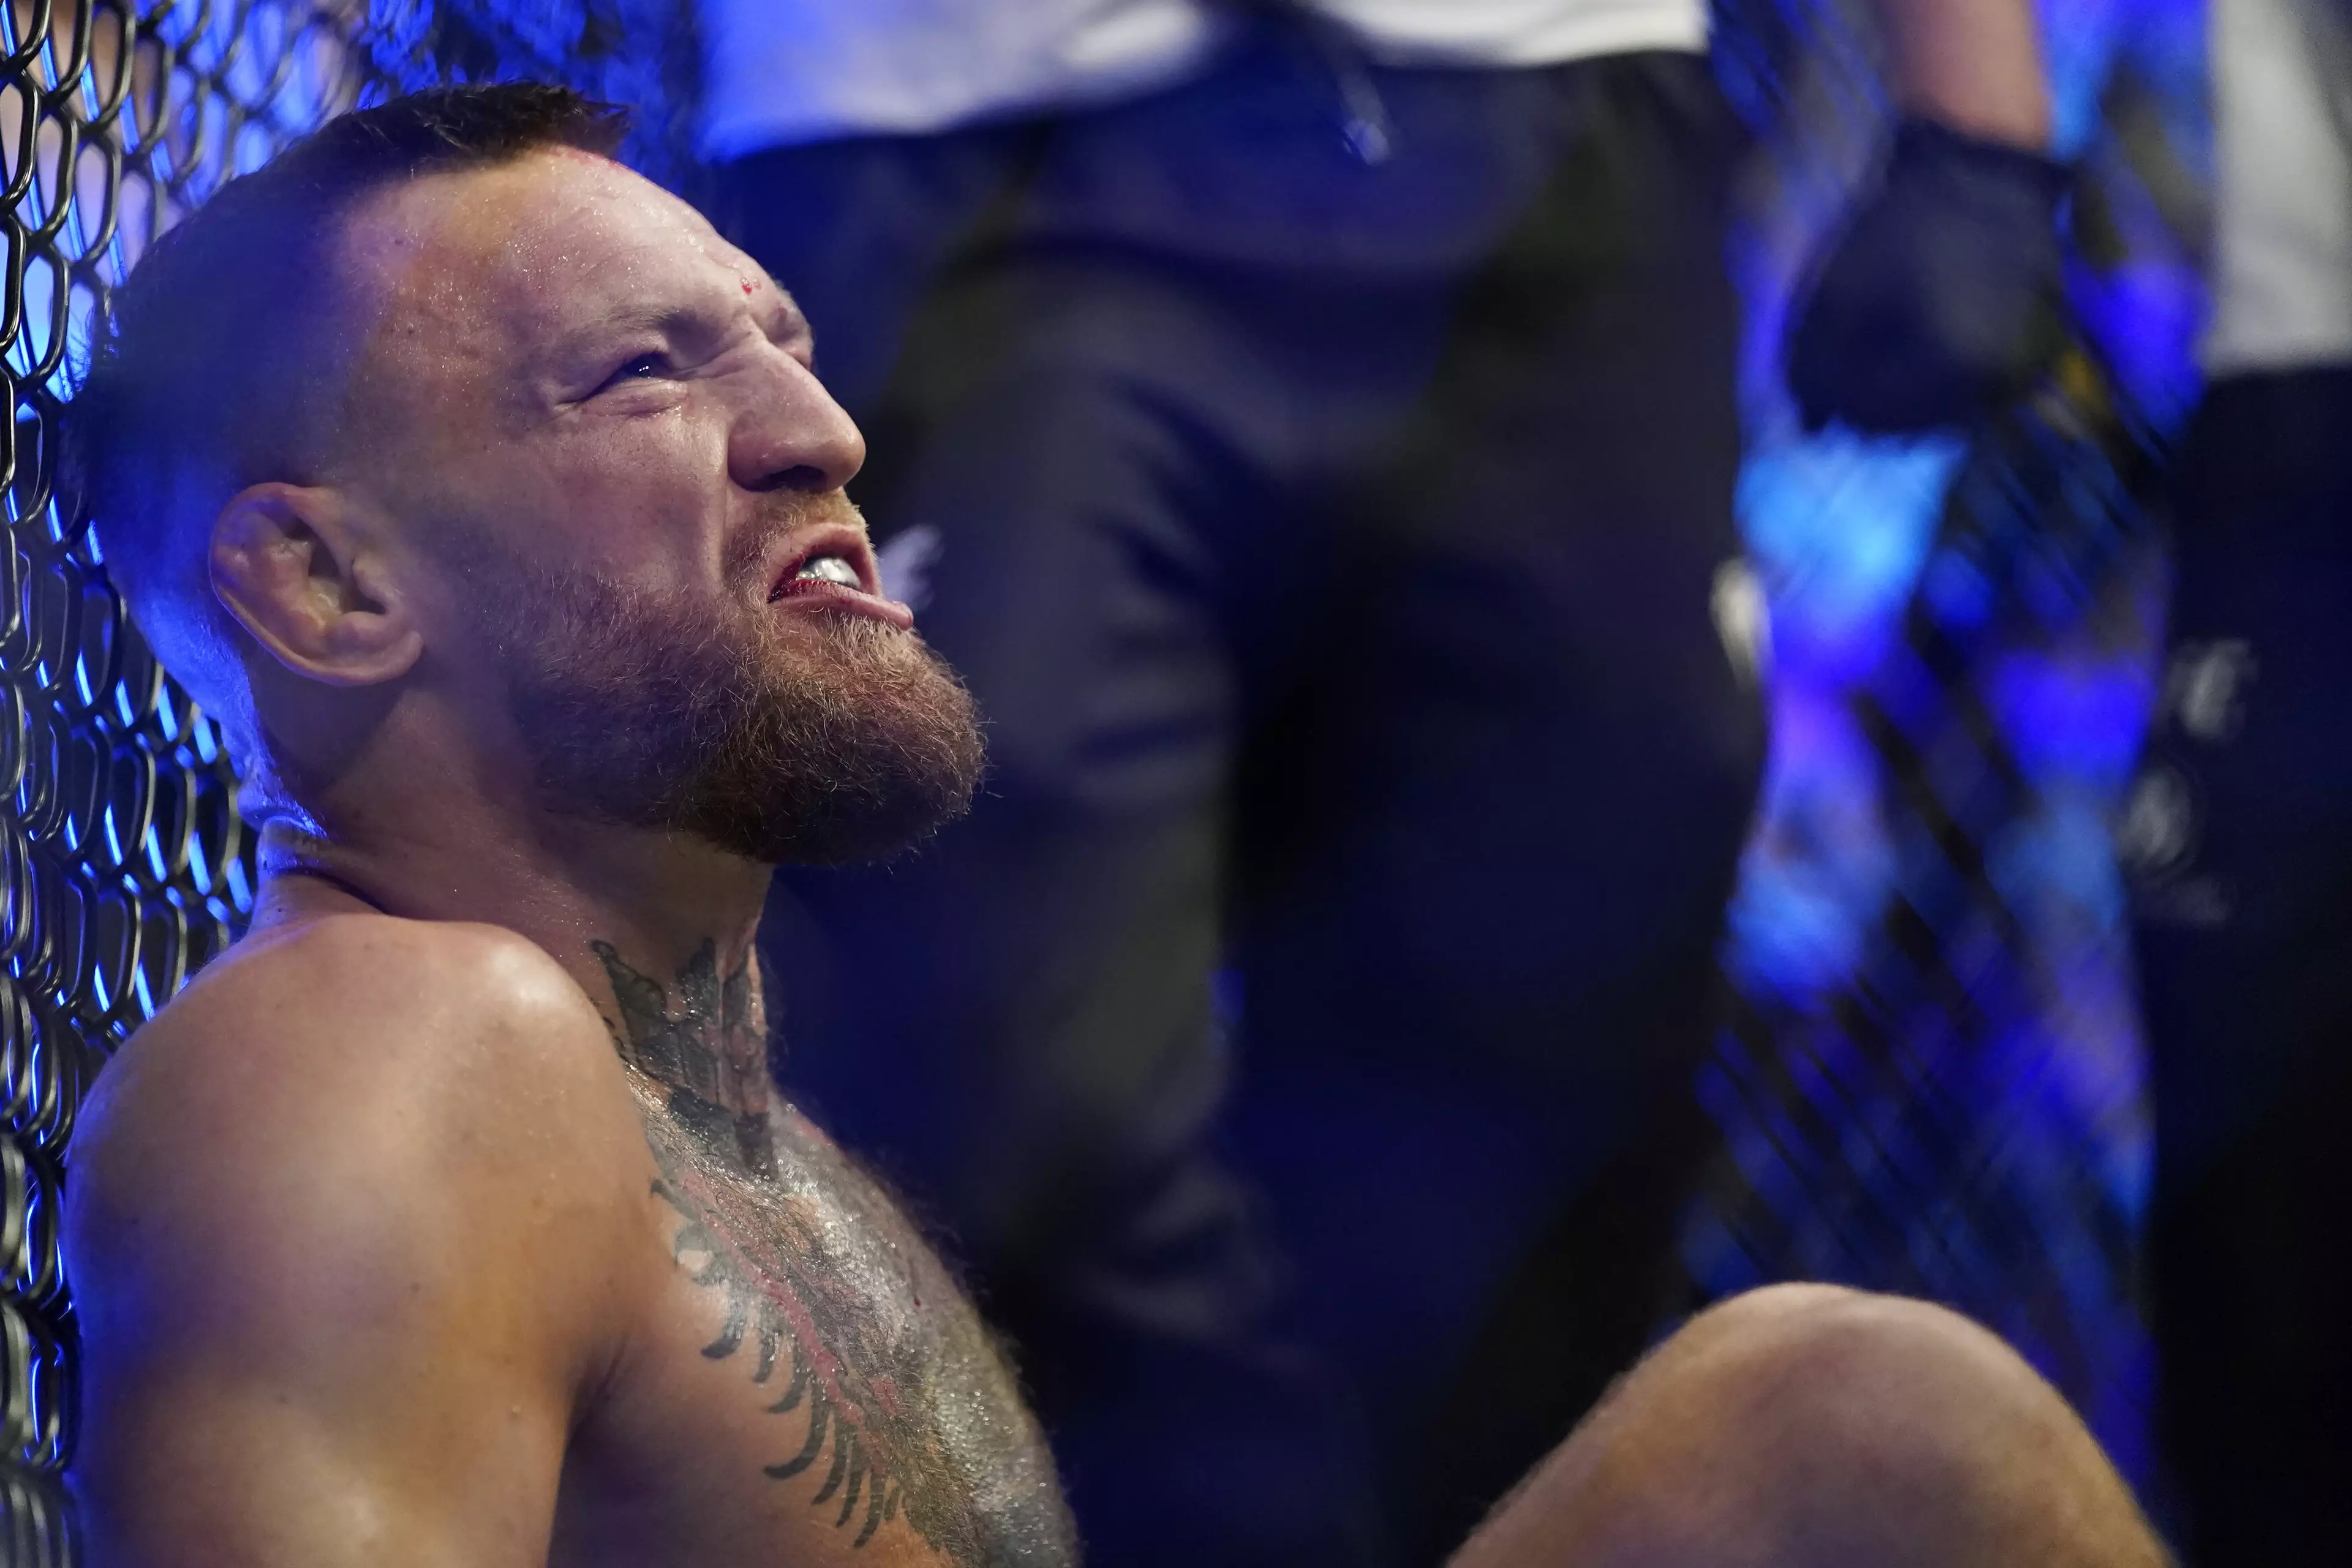 McGregor continued to shout insults whilst sat on the octagon floor. Image: PA Images